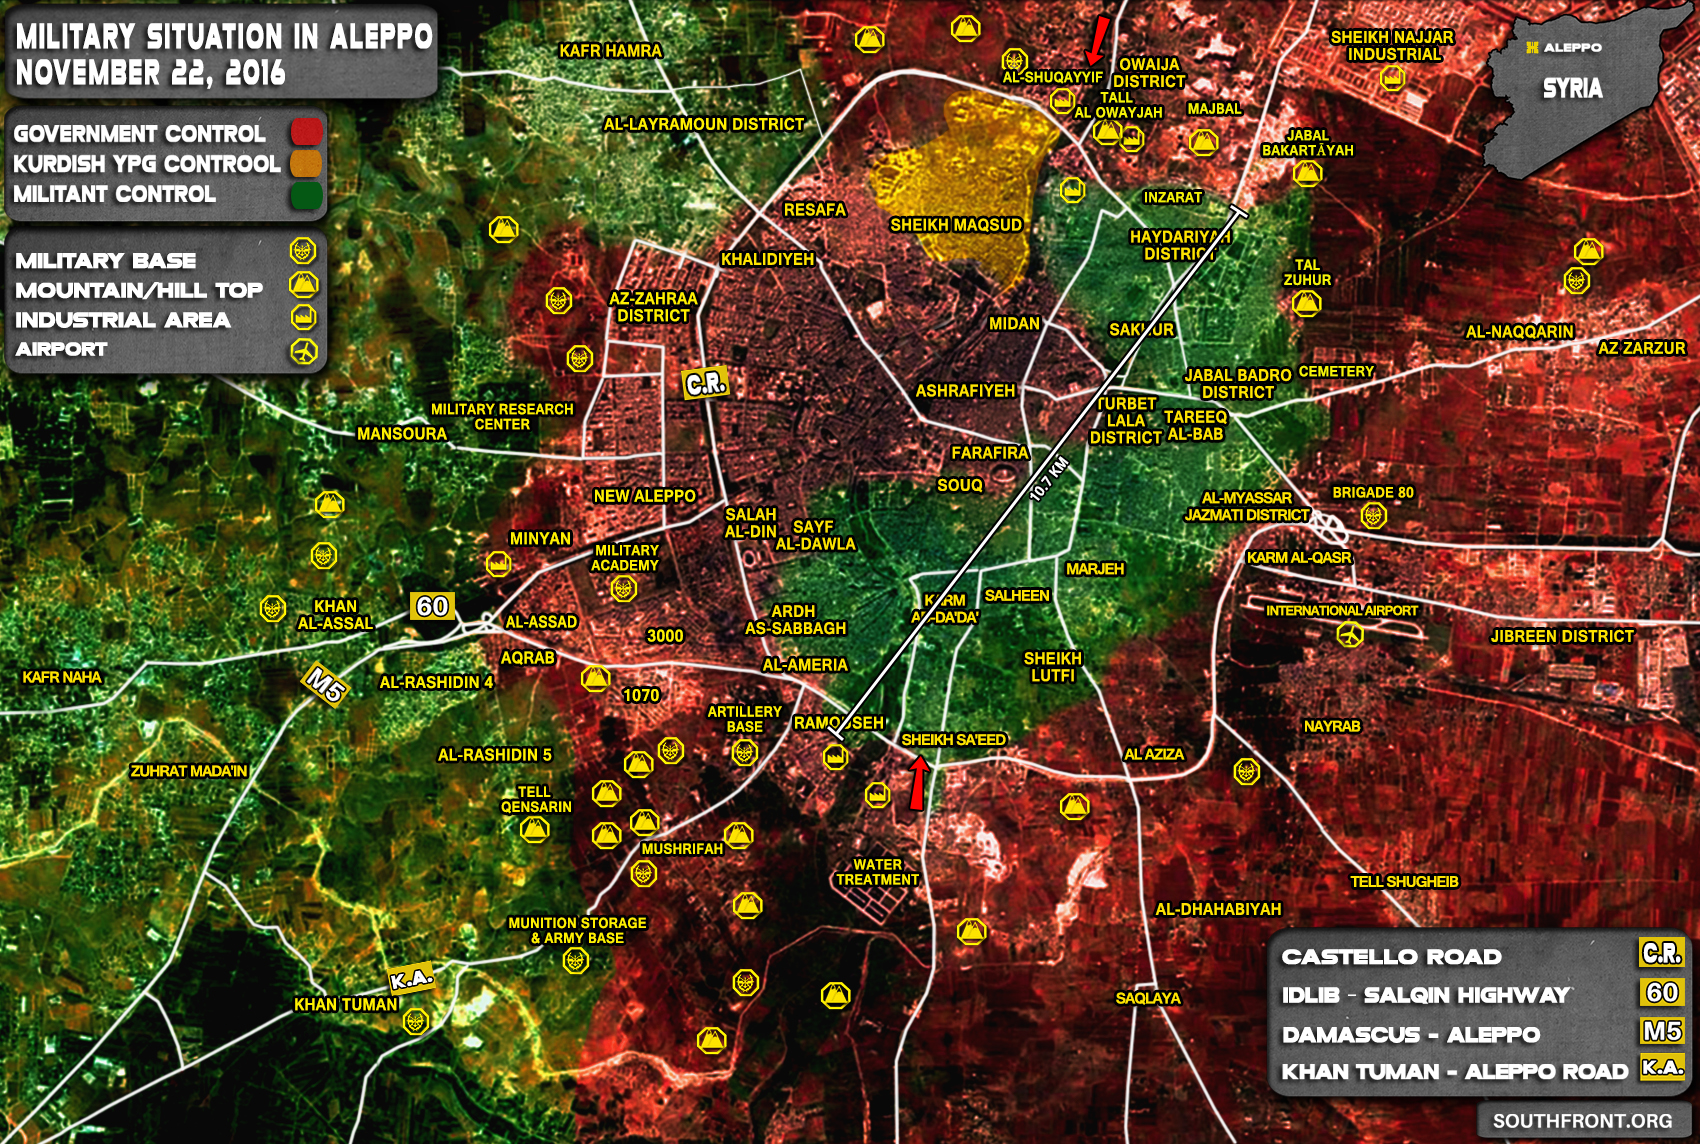 Overview of Military Situation in Aleppo City on November 22, 2016